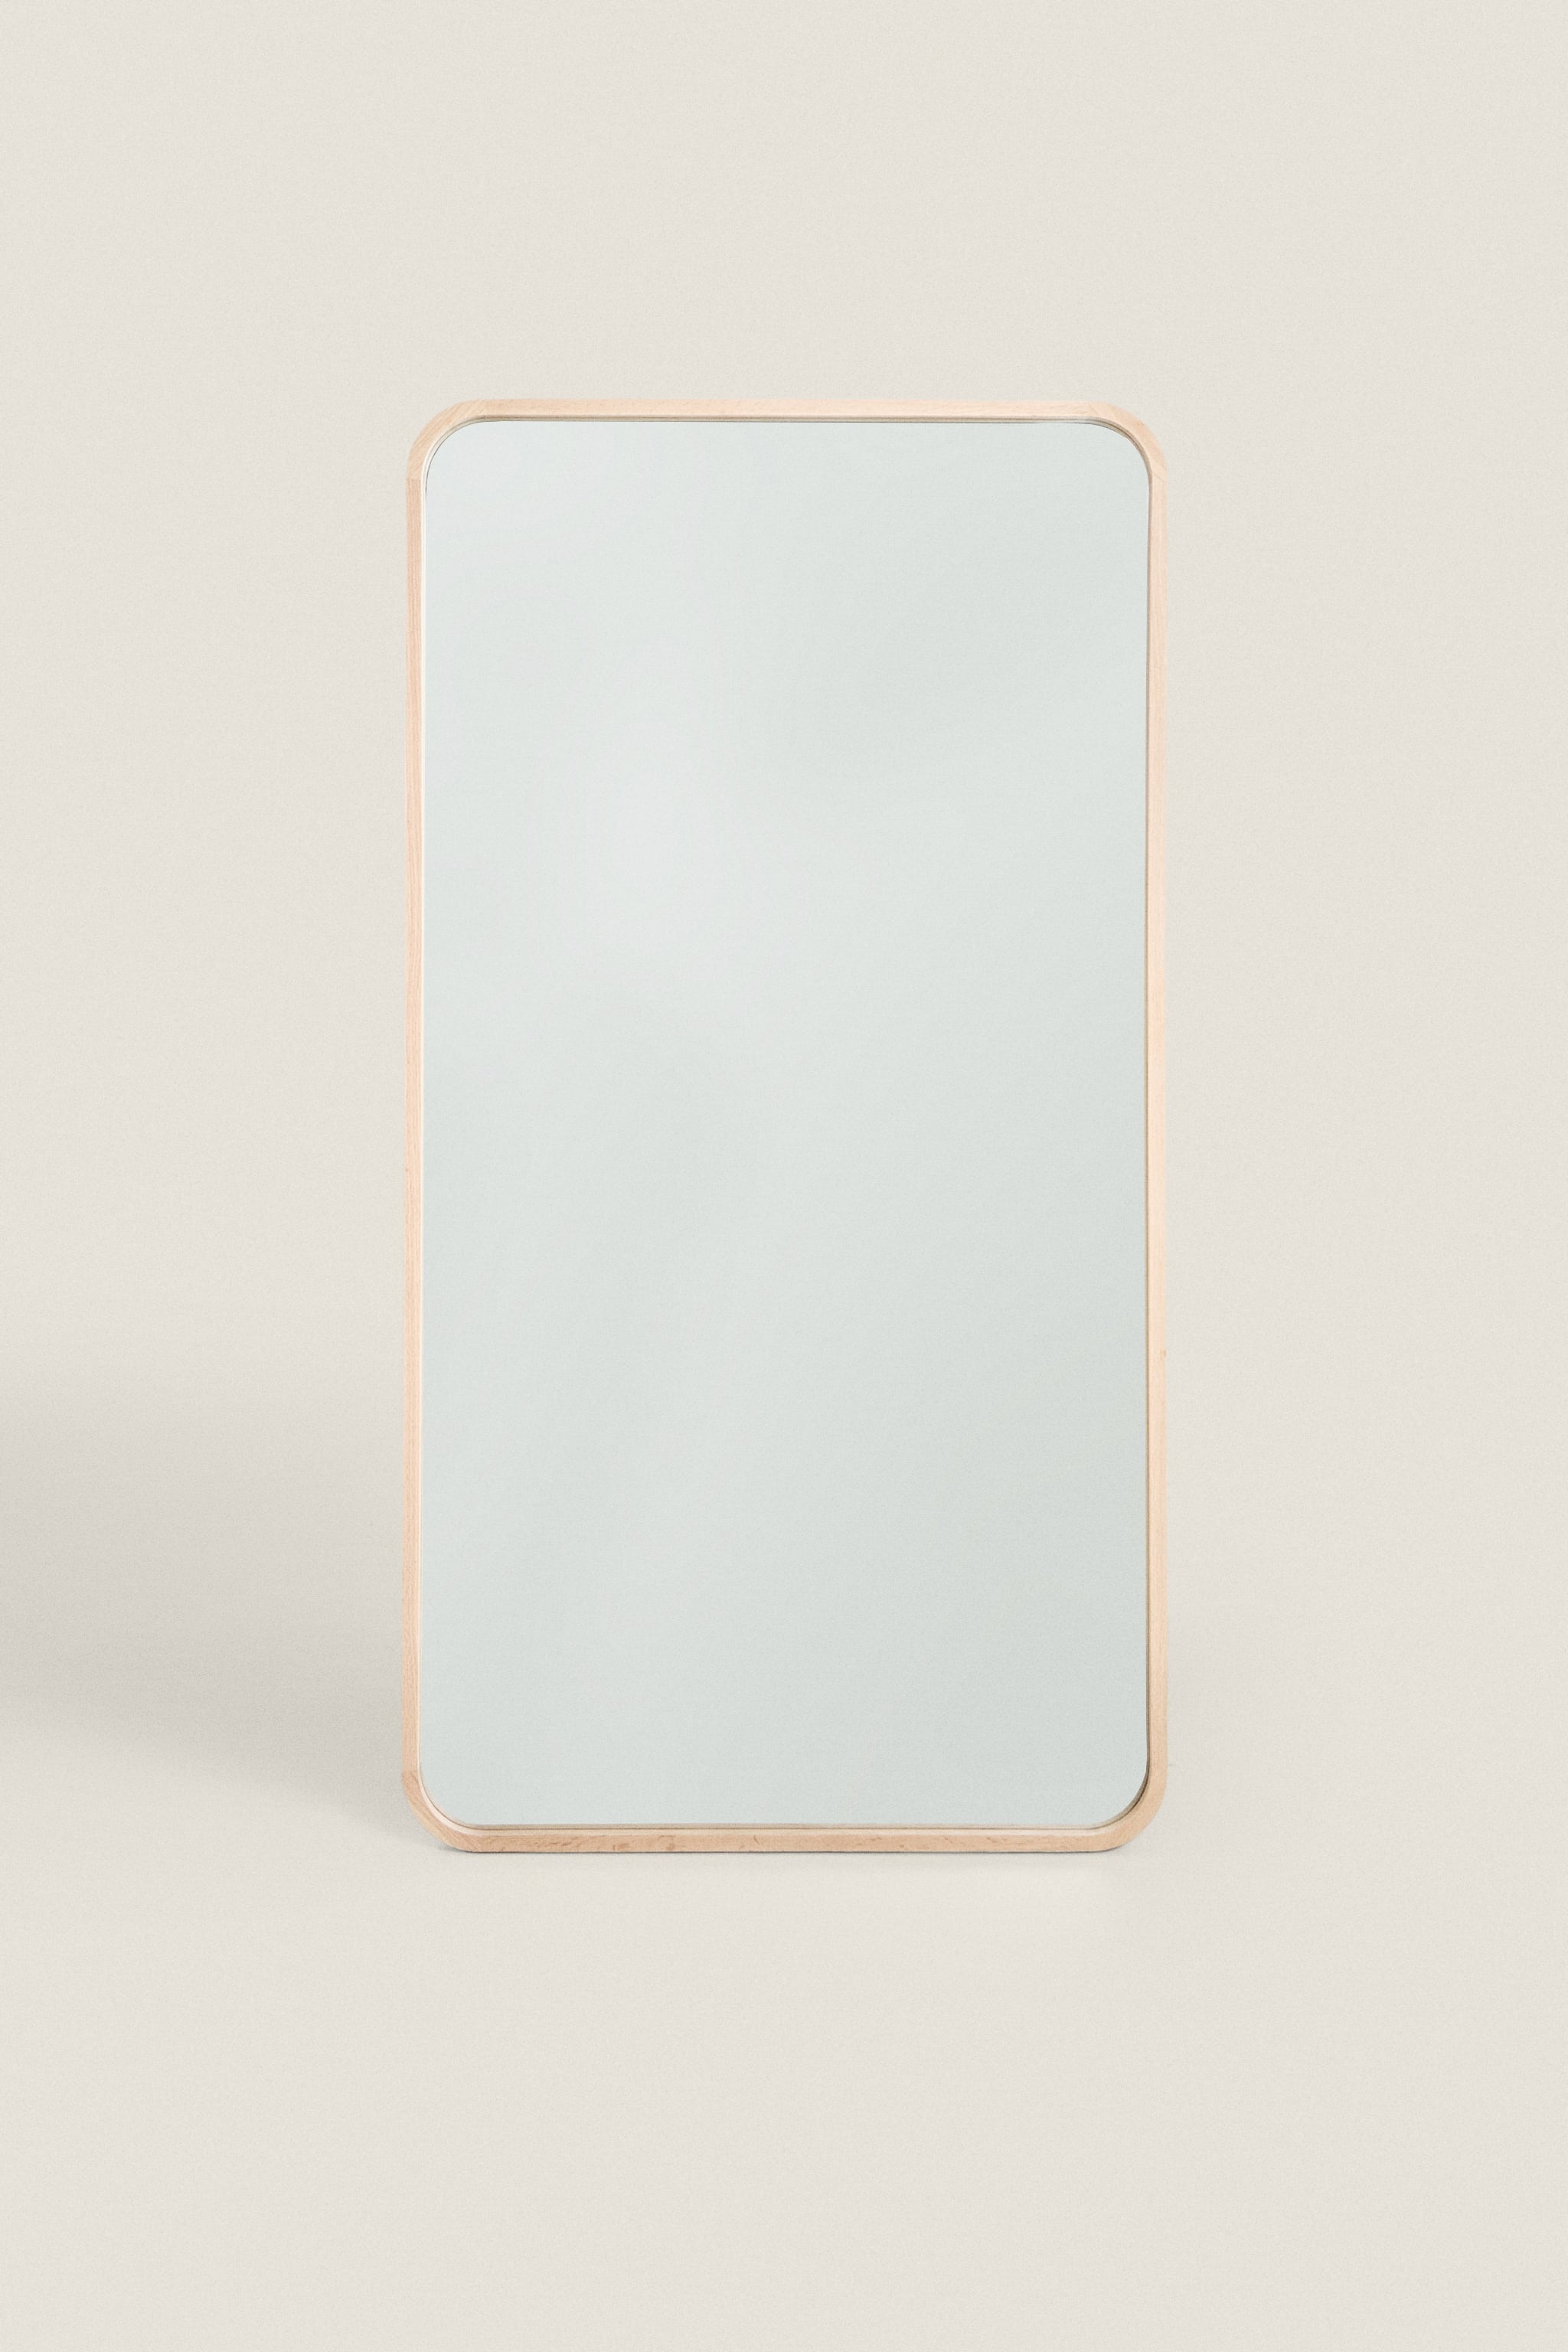 LARGE HANGING FULL-LENGTH MIRROR WITH ROUNDED FRAME